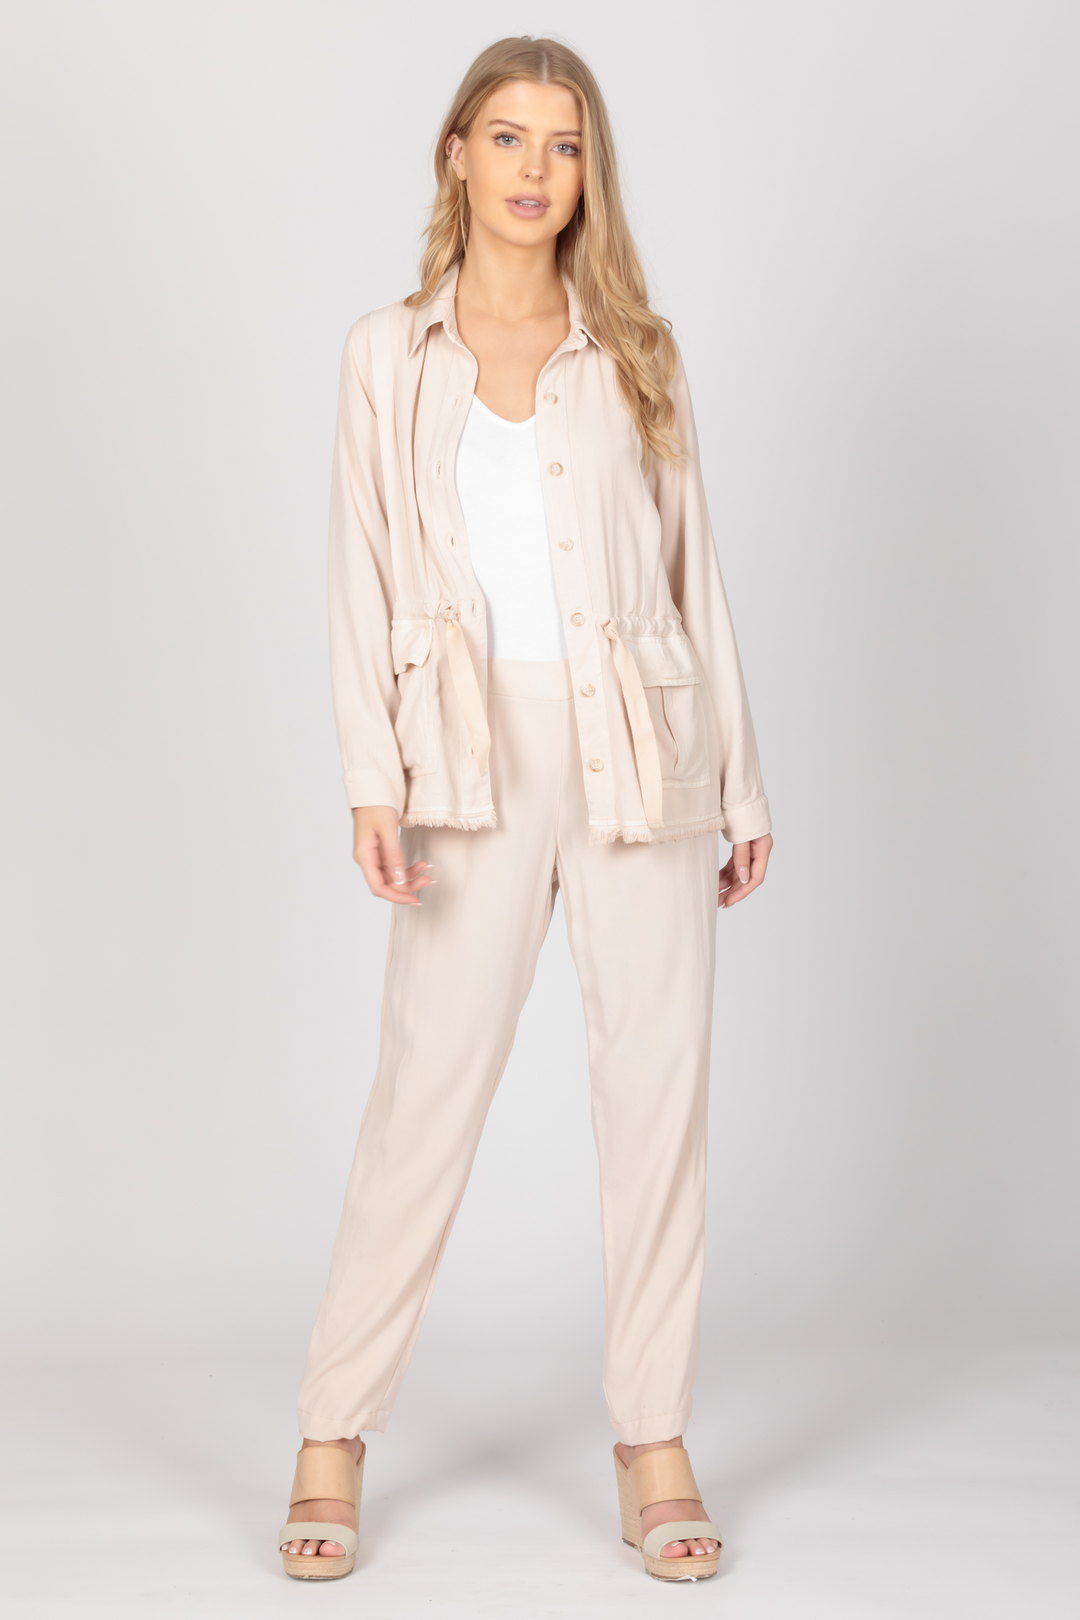 SAND CINCHED WAIST JACKET - Kingfisher Road - Online Boutique